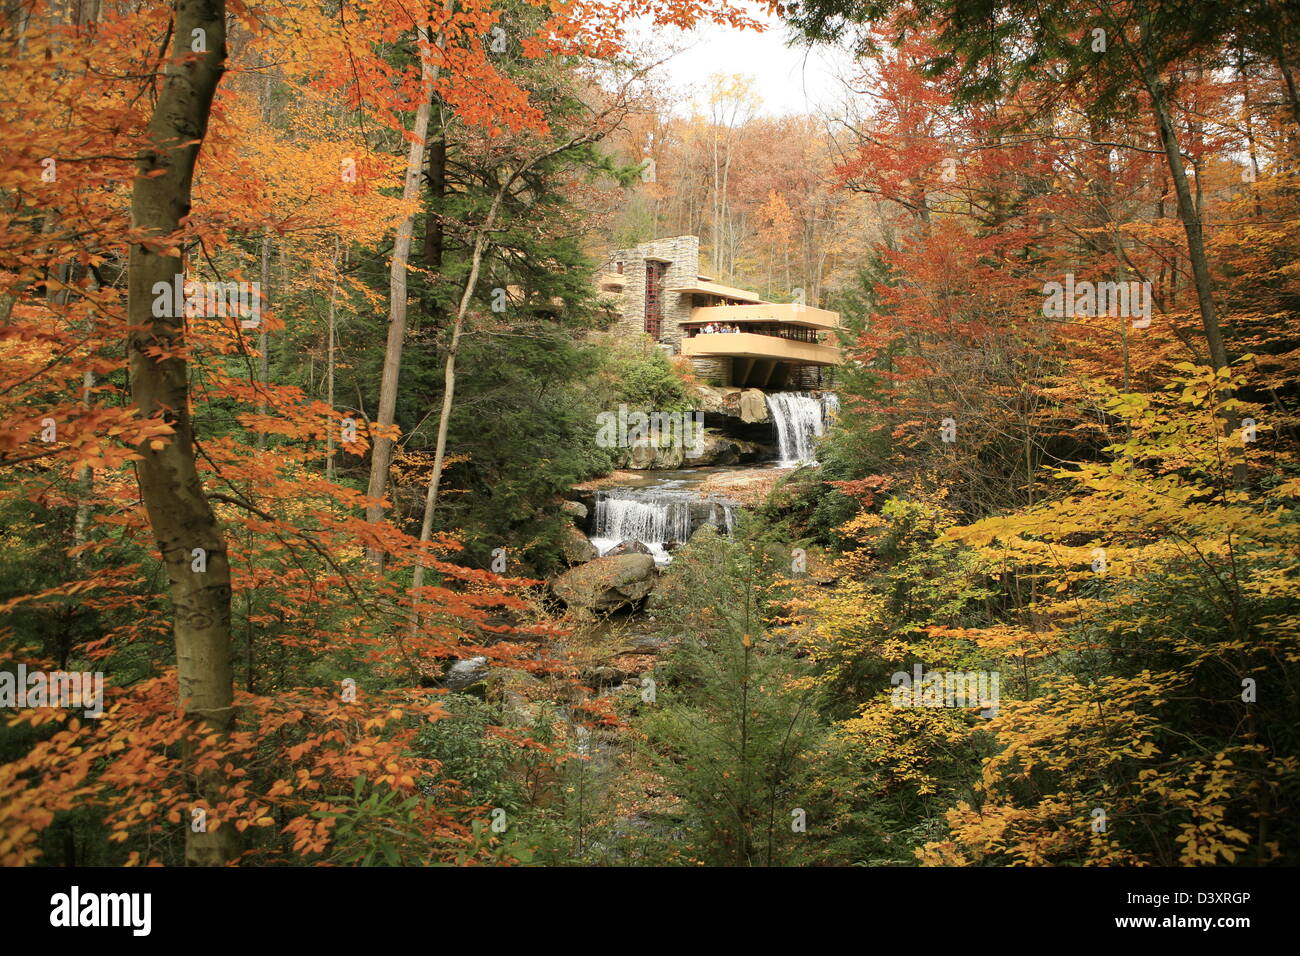 Immeuble Fallingwater Frank Lloyd Wright, Mill Run, PA, United States Banque D'Images